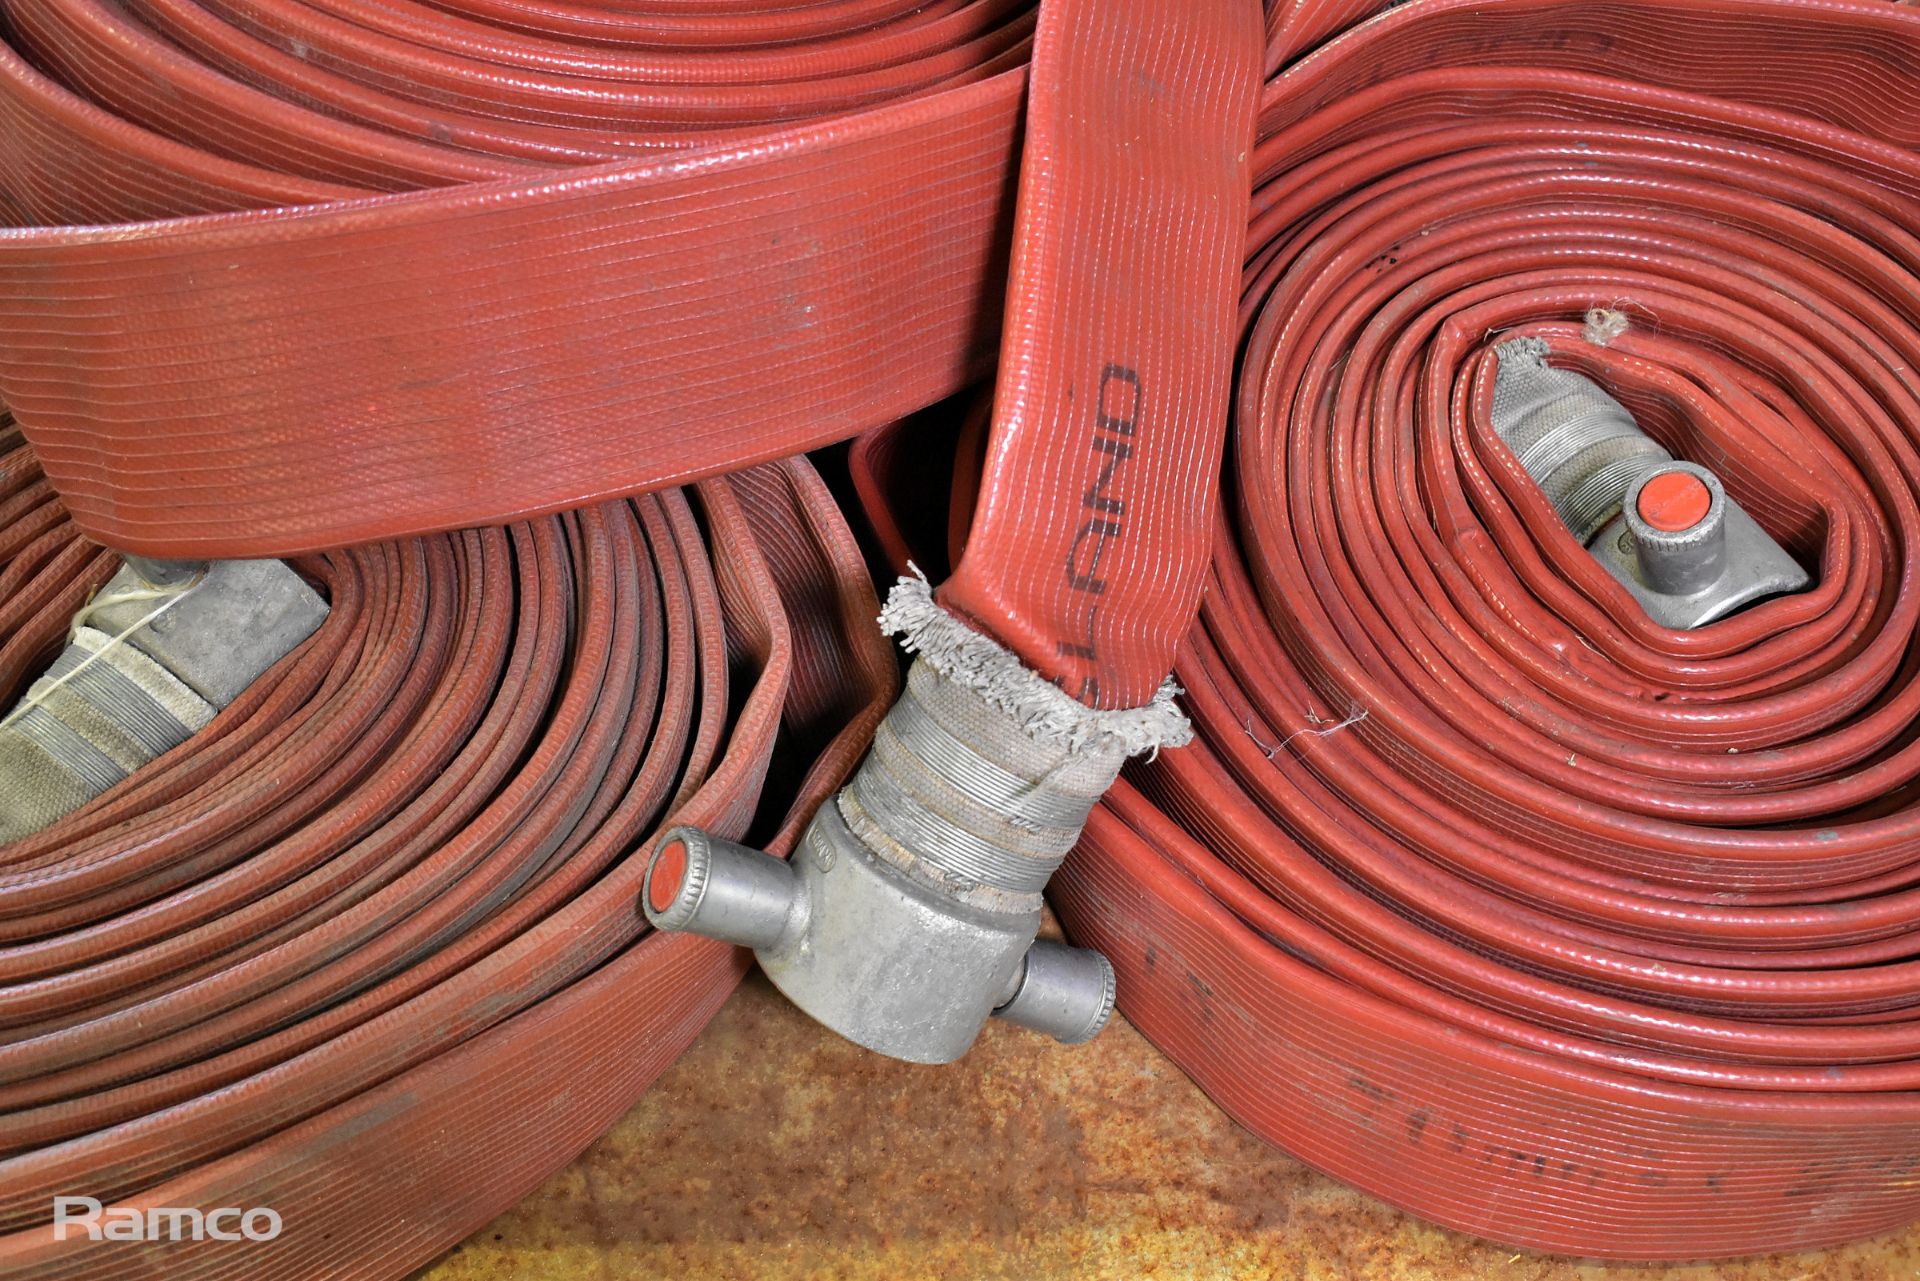 5x Angus Duraline BS 6391 2009 Type 3 31015 Layflat Fire Hoses - approx. 22.5m long, 70mm diameter - Image 2 of 3